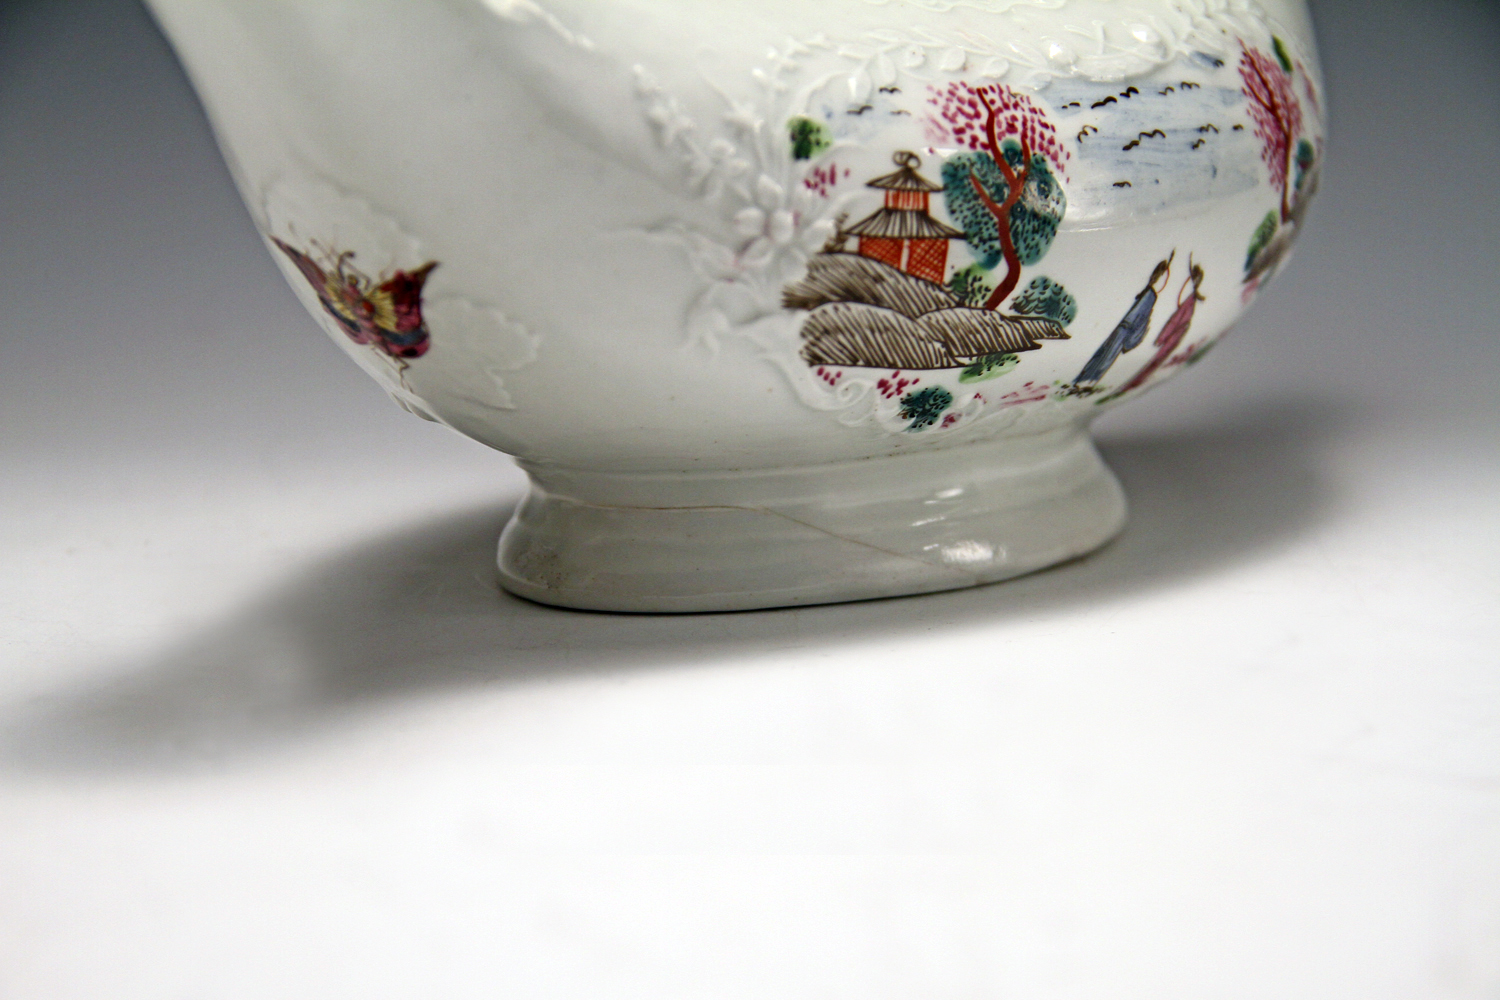 1037 - Very rare Worcester polychrome sauceboat with the "staghunt pattern" c 1755